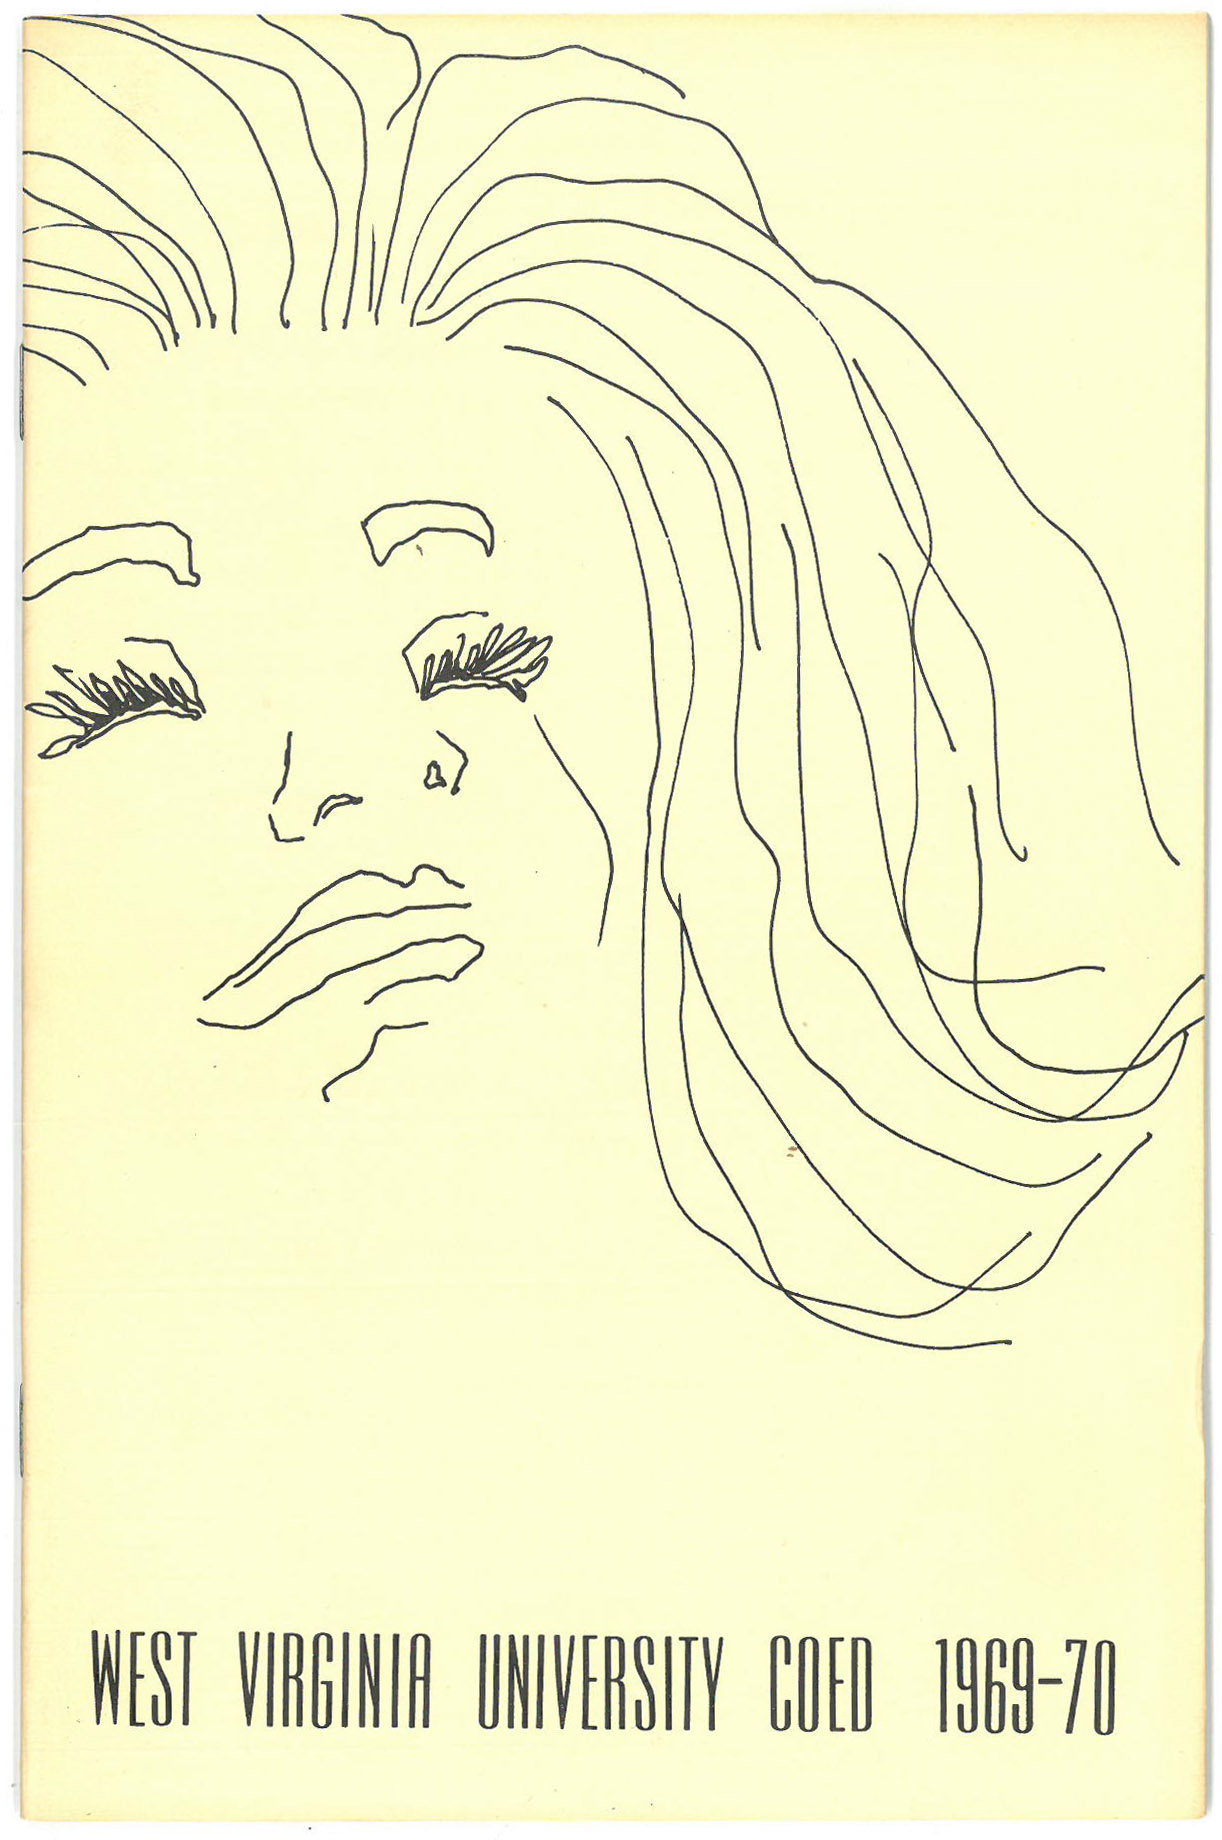 Sketched face of a woman, with text "West Virginia University Coed 1969-70"